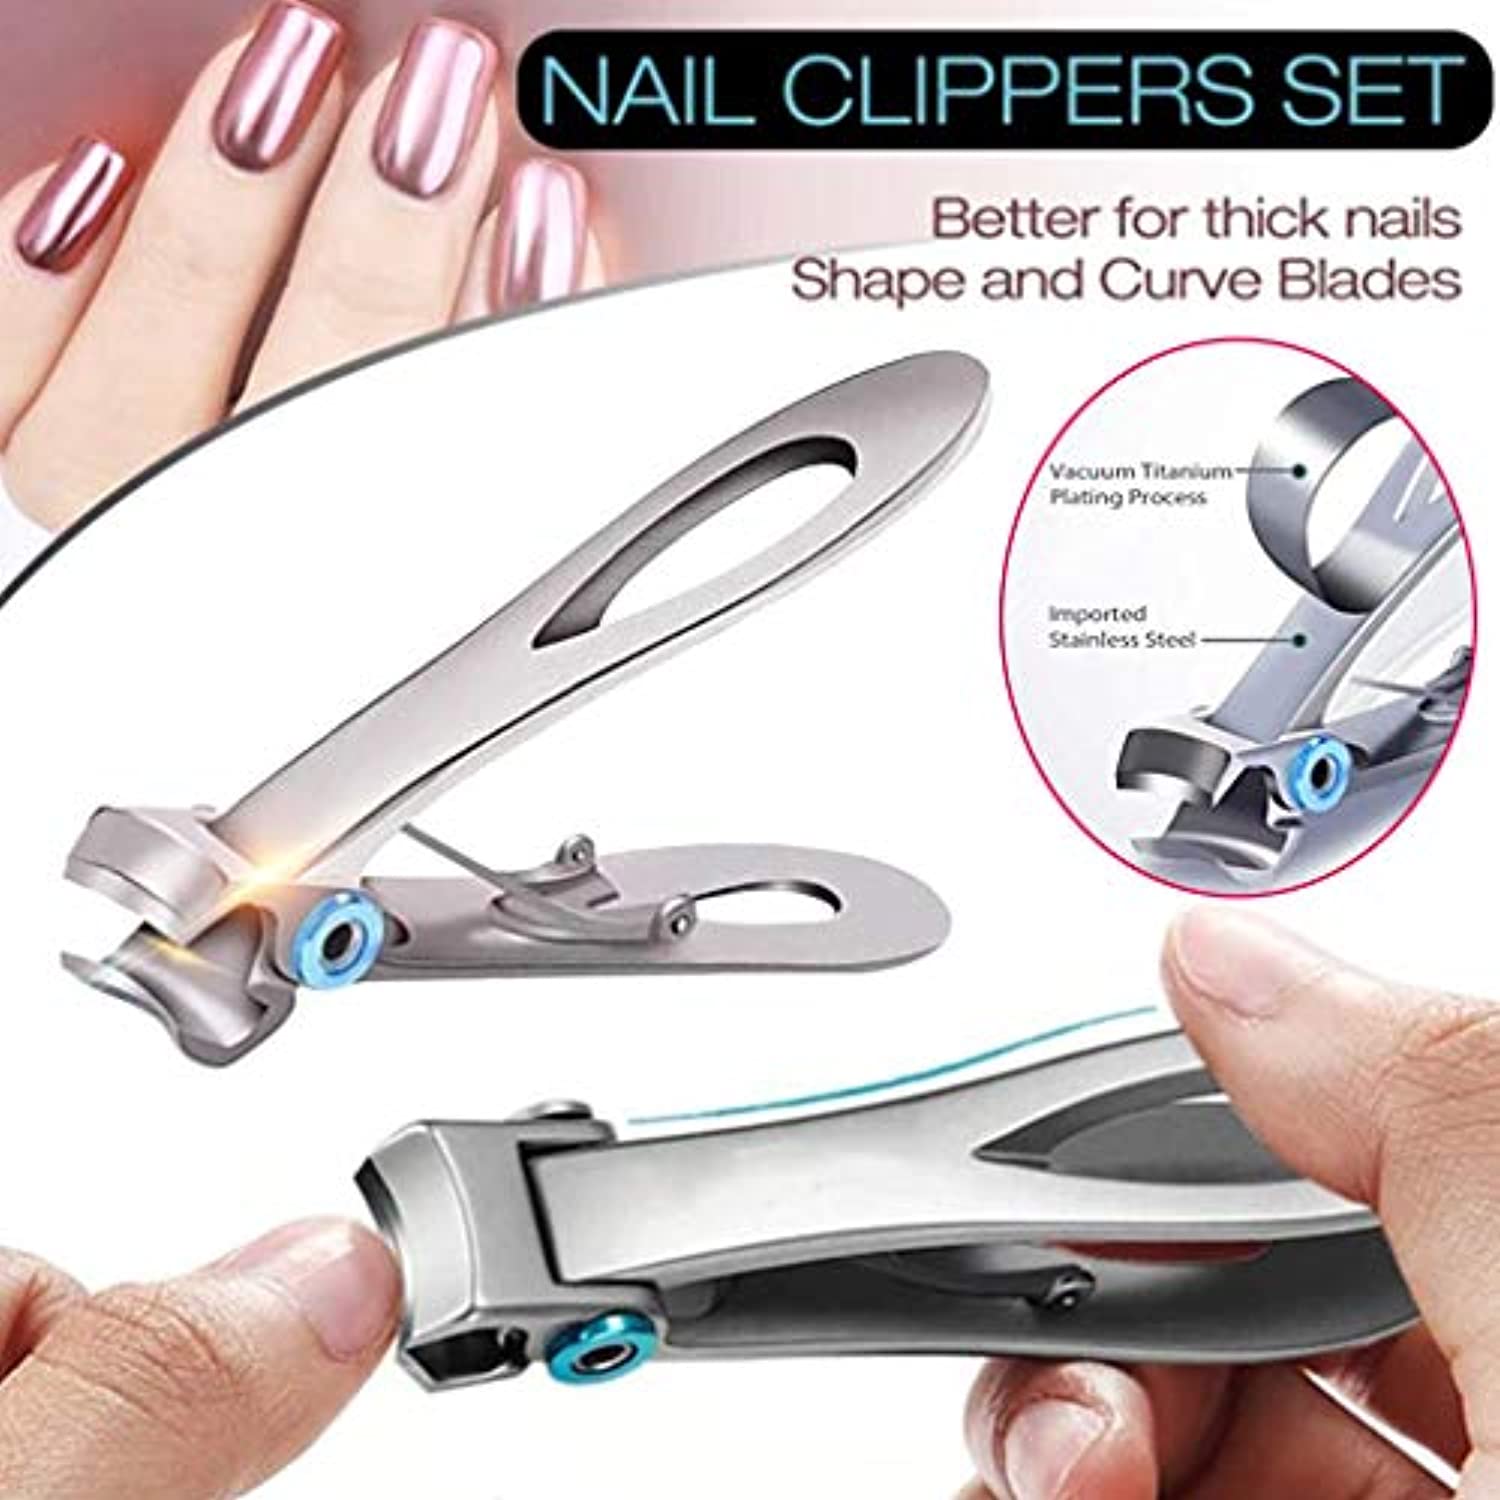 15mm Wide Jaw Opening Toenail Clipper,Ergonomics Finger Cutter Trimmer for Thick Nails,Oversized Stainless Steel Fingernail Clippers for Ingrown for Men,Tough Nails,Seniors,Adults (Silver)